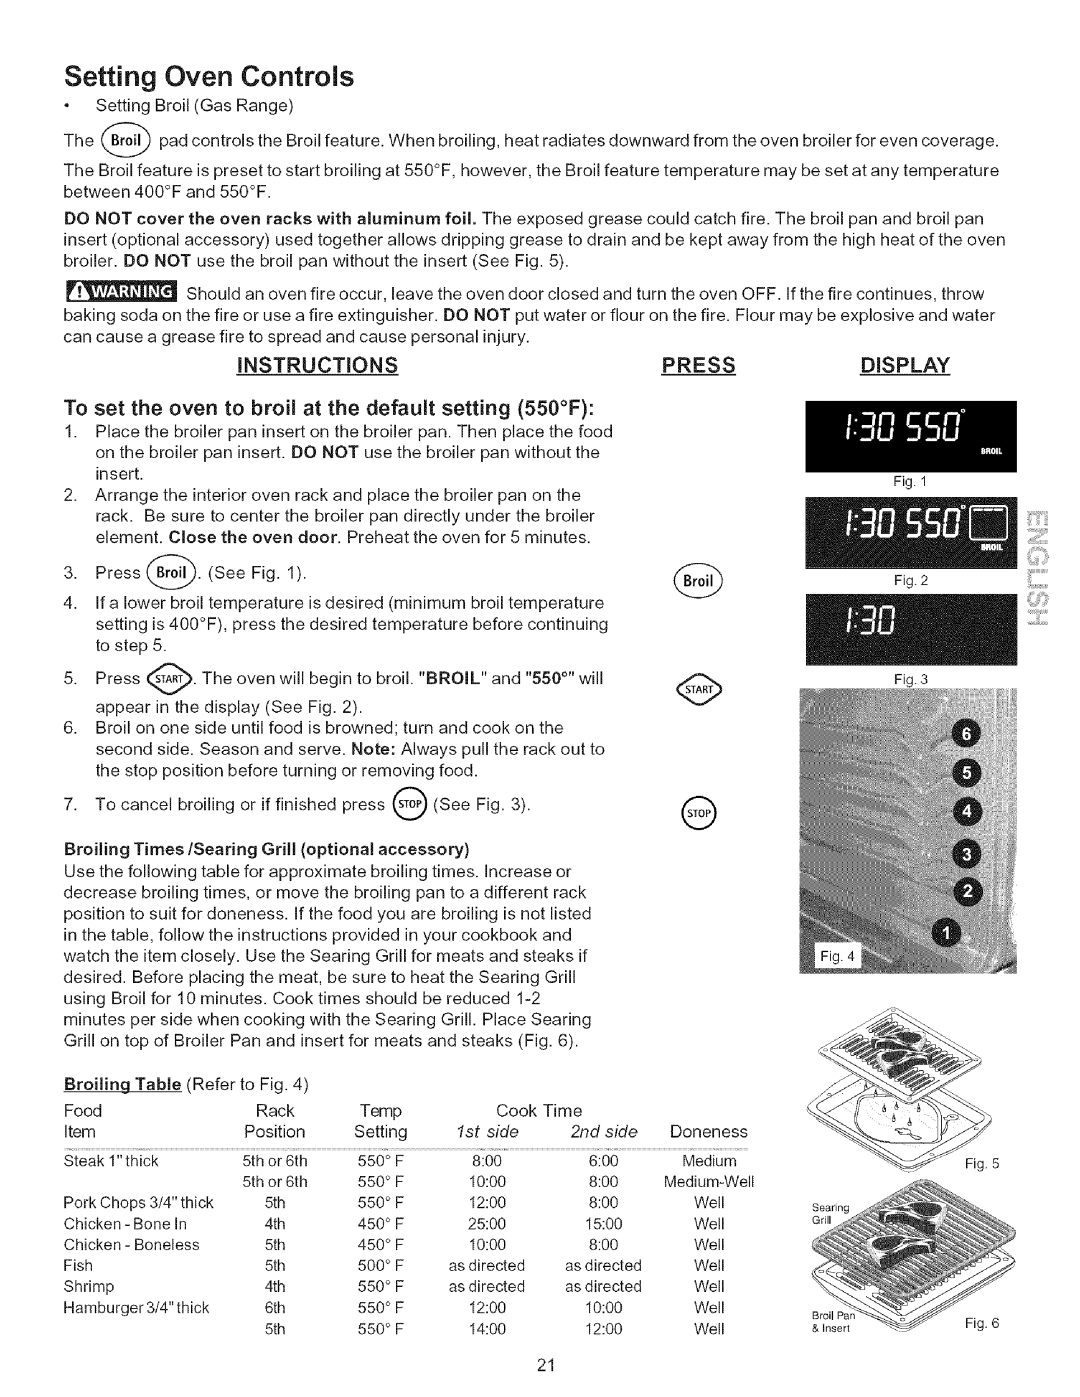 Kenmore 790.7943 manual Setting Oven Controls, Instructionspress, Display, Broiling Times/Searing Grill optional accessory 